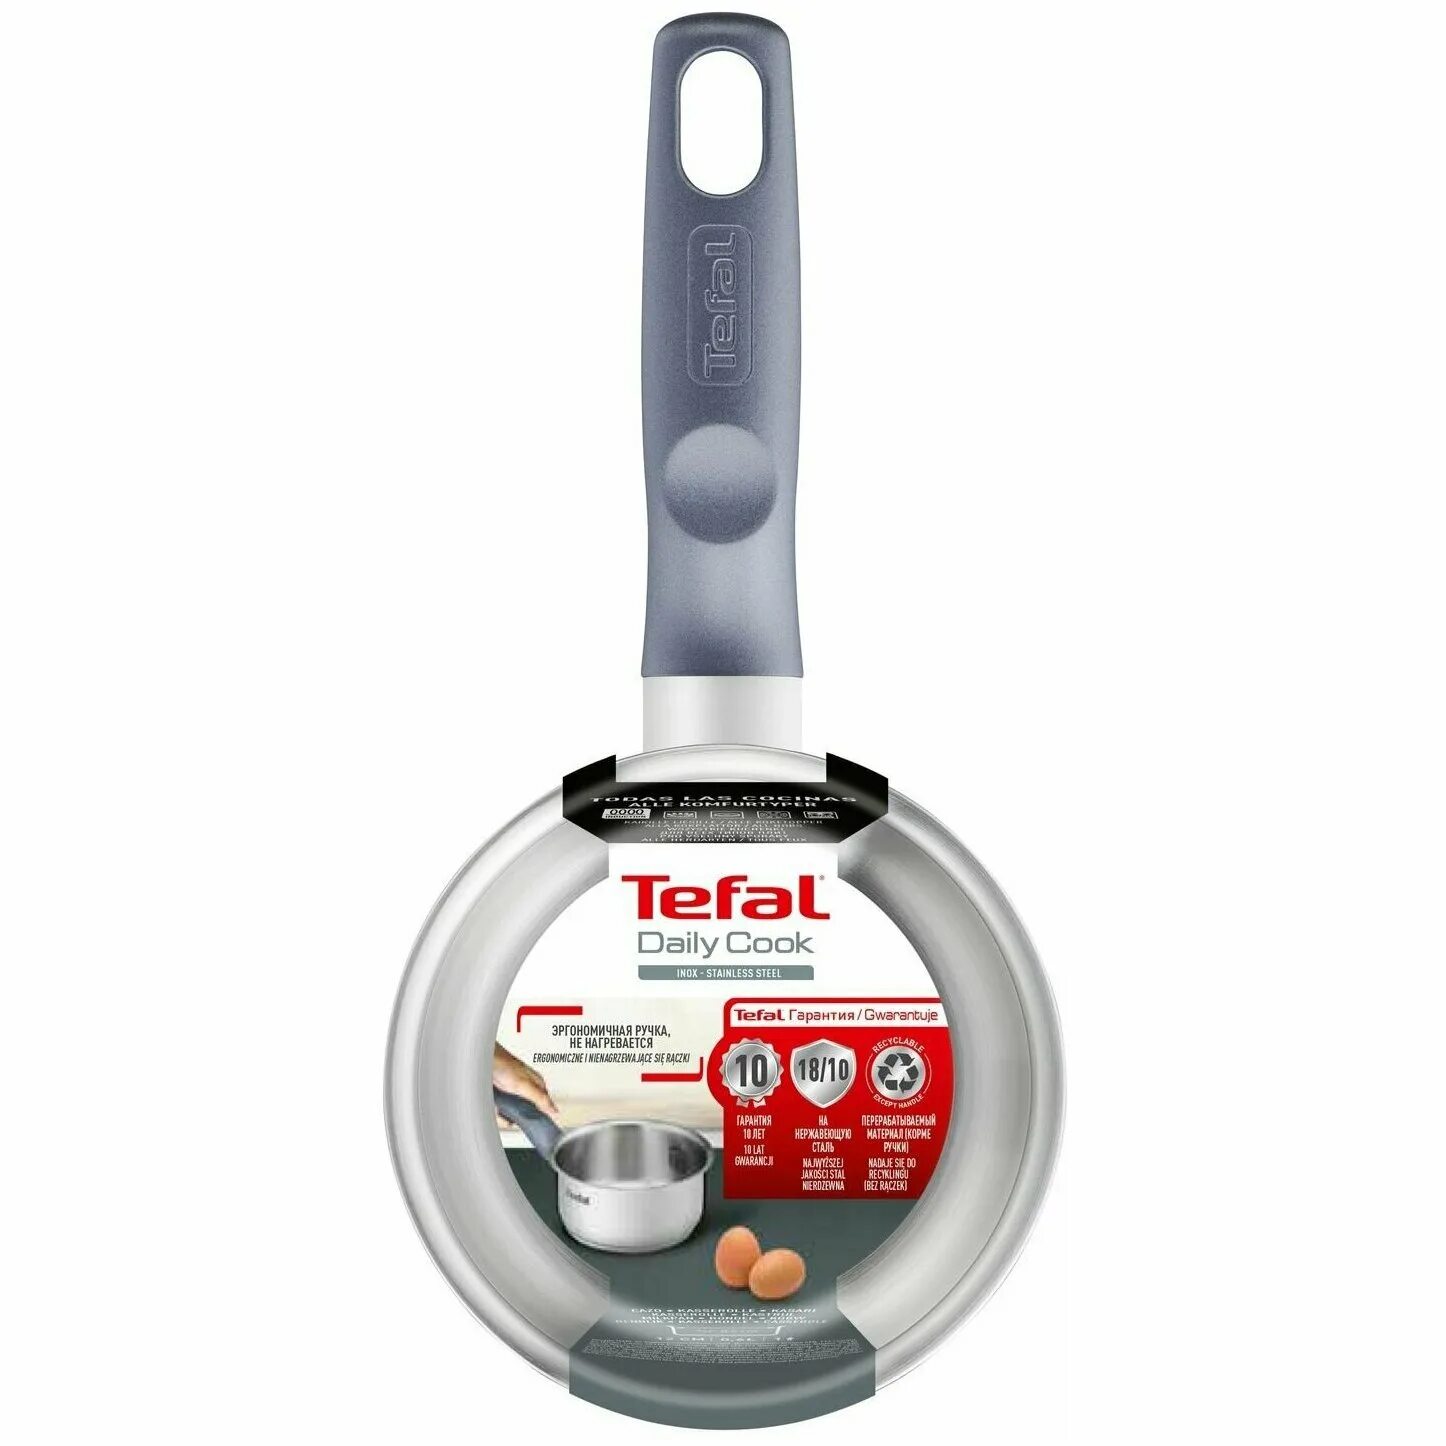 Tefal daily cook. Tefal Daily Cook g7130414.